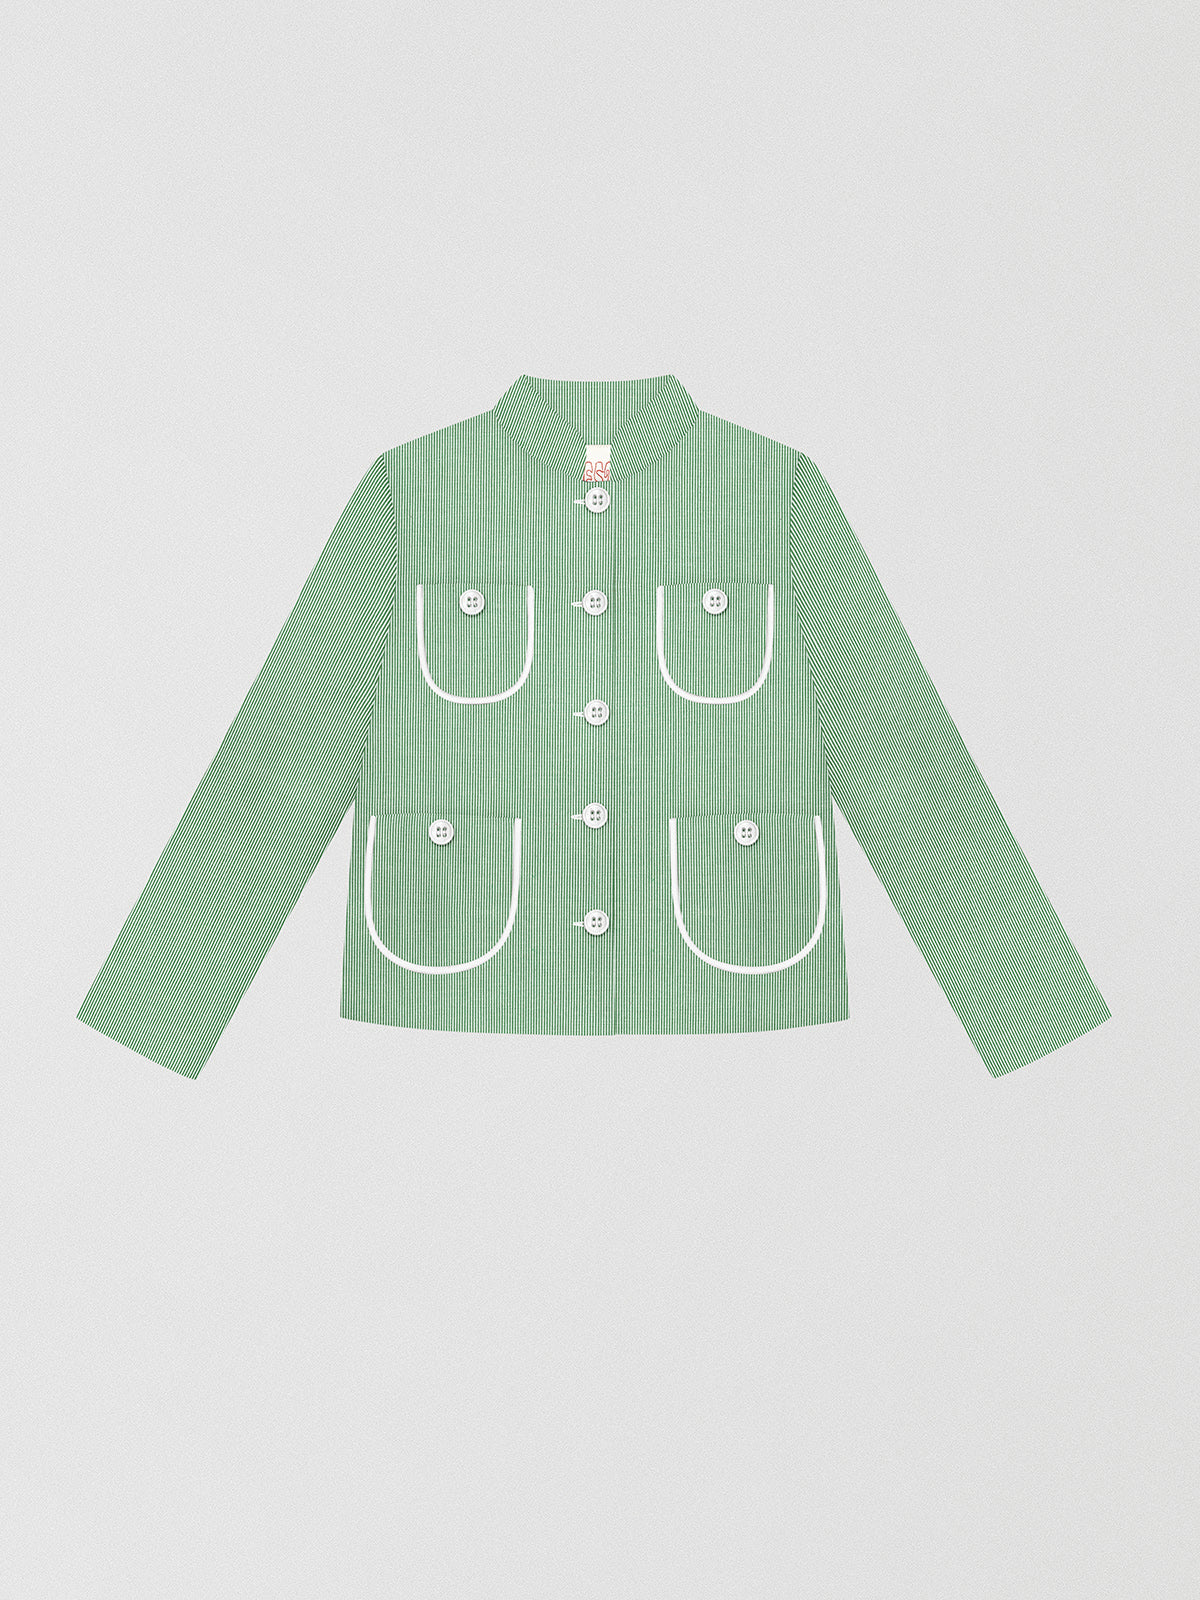 Buttoned jacket made in green and white stripes. It has contrasting white bias detail and four patch pockets. It has a mao collar and white button closure.